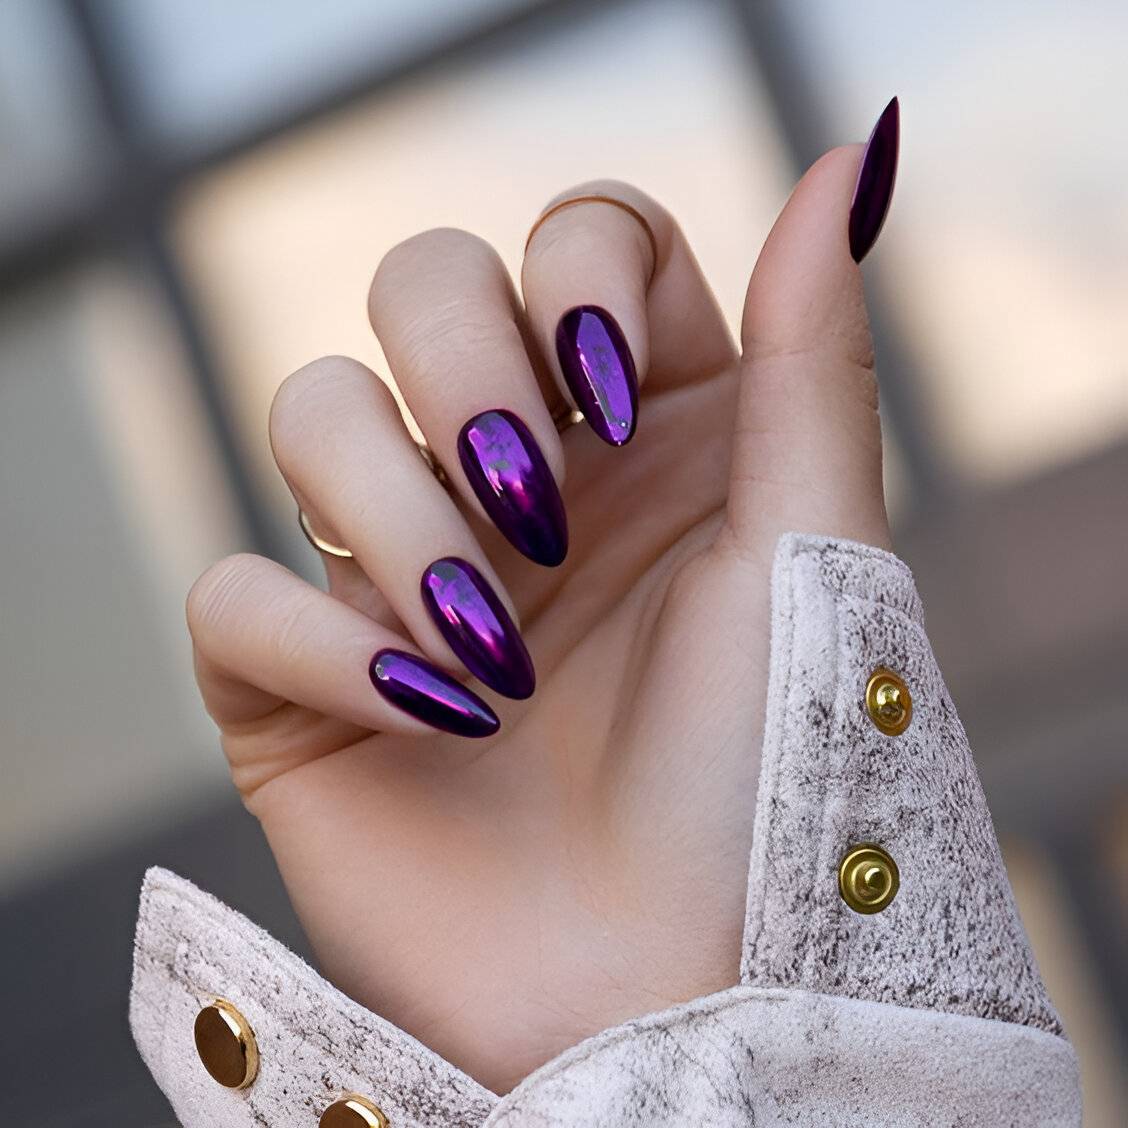 30 Chic Chrome Nail Designs For The Ultimate Glam Look - 197